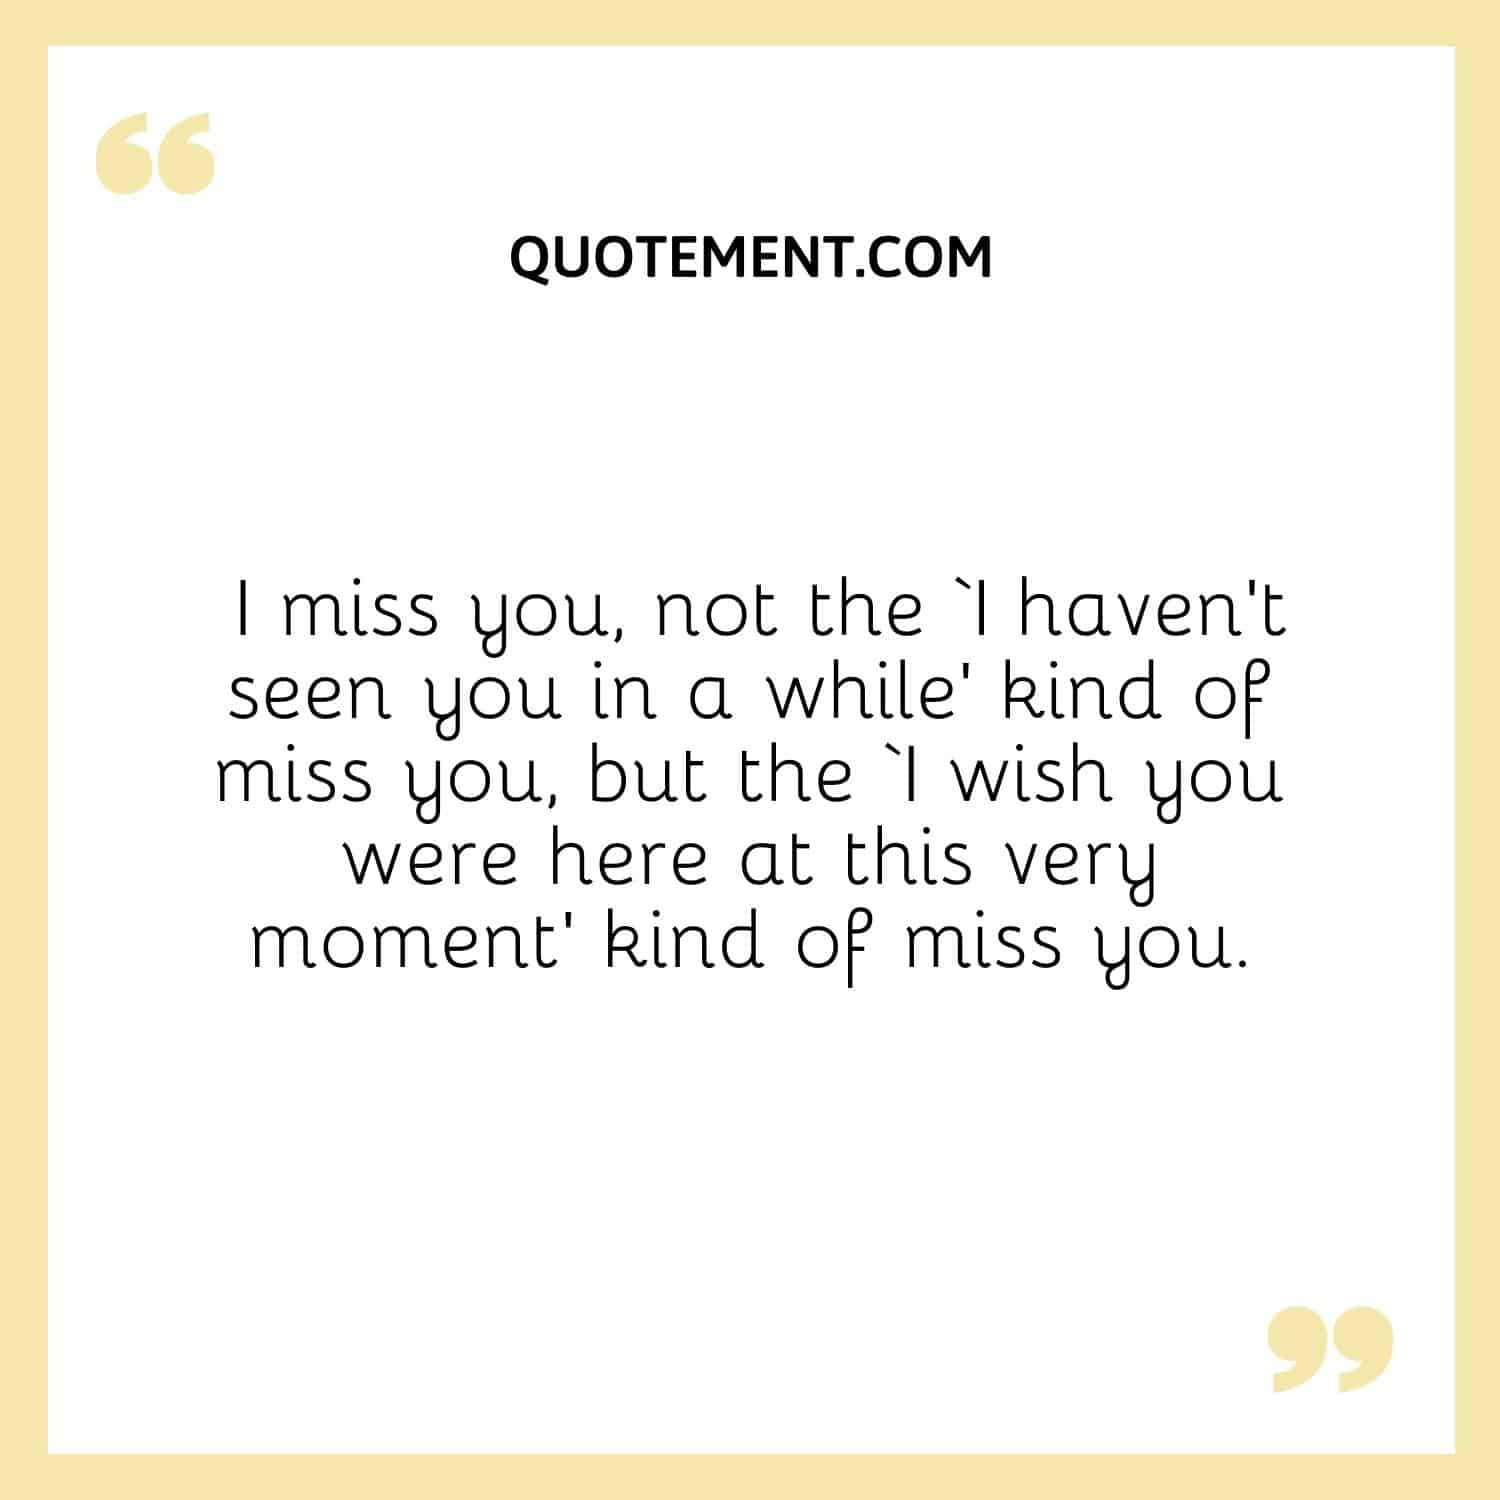 I miss you, not the ‘I haven’t seen you in a while’ kind of miss you, but the ‘I wish you were here at this very moment’ kind of miss you.